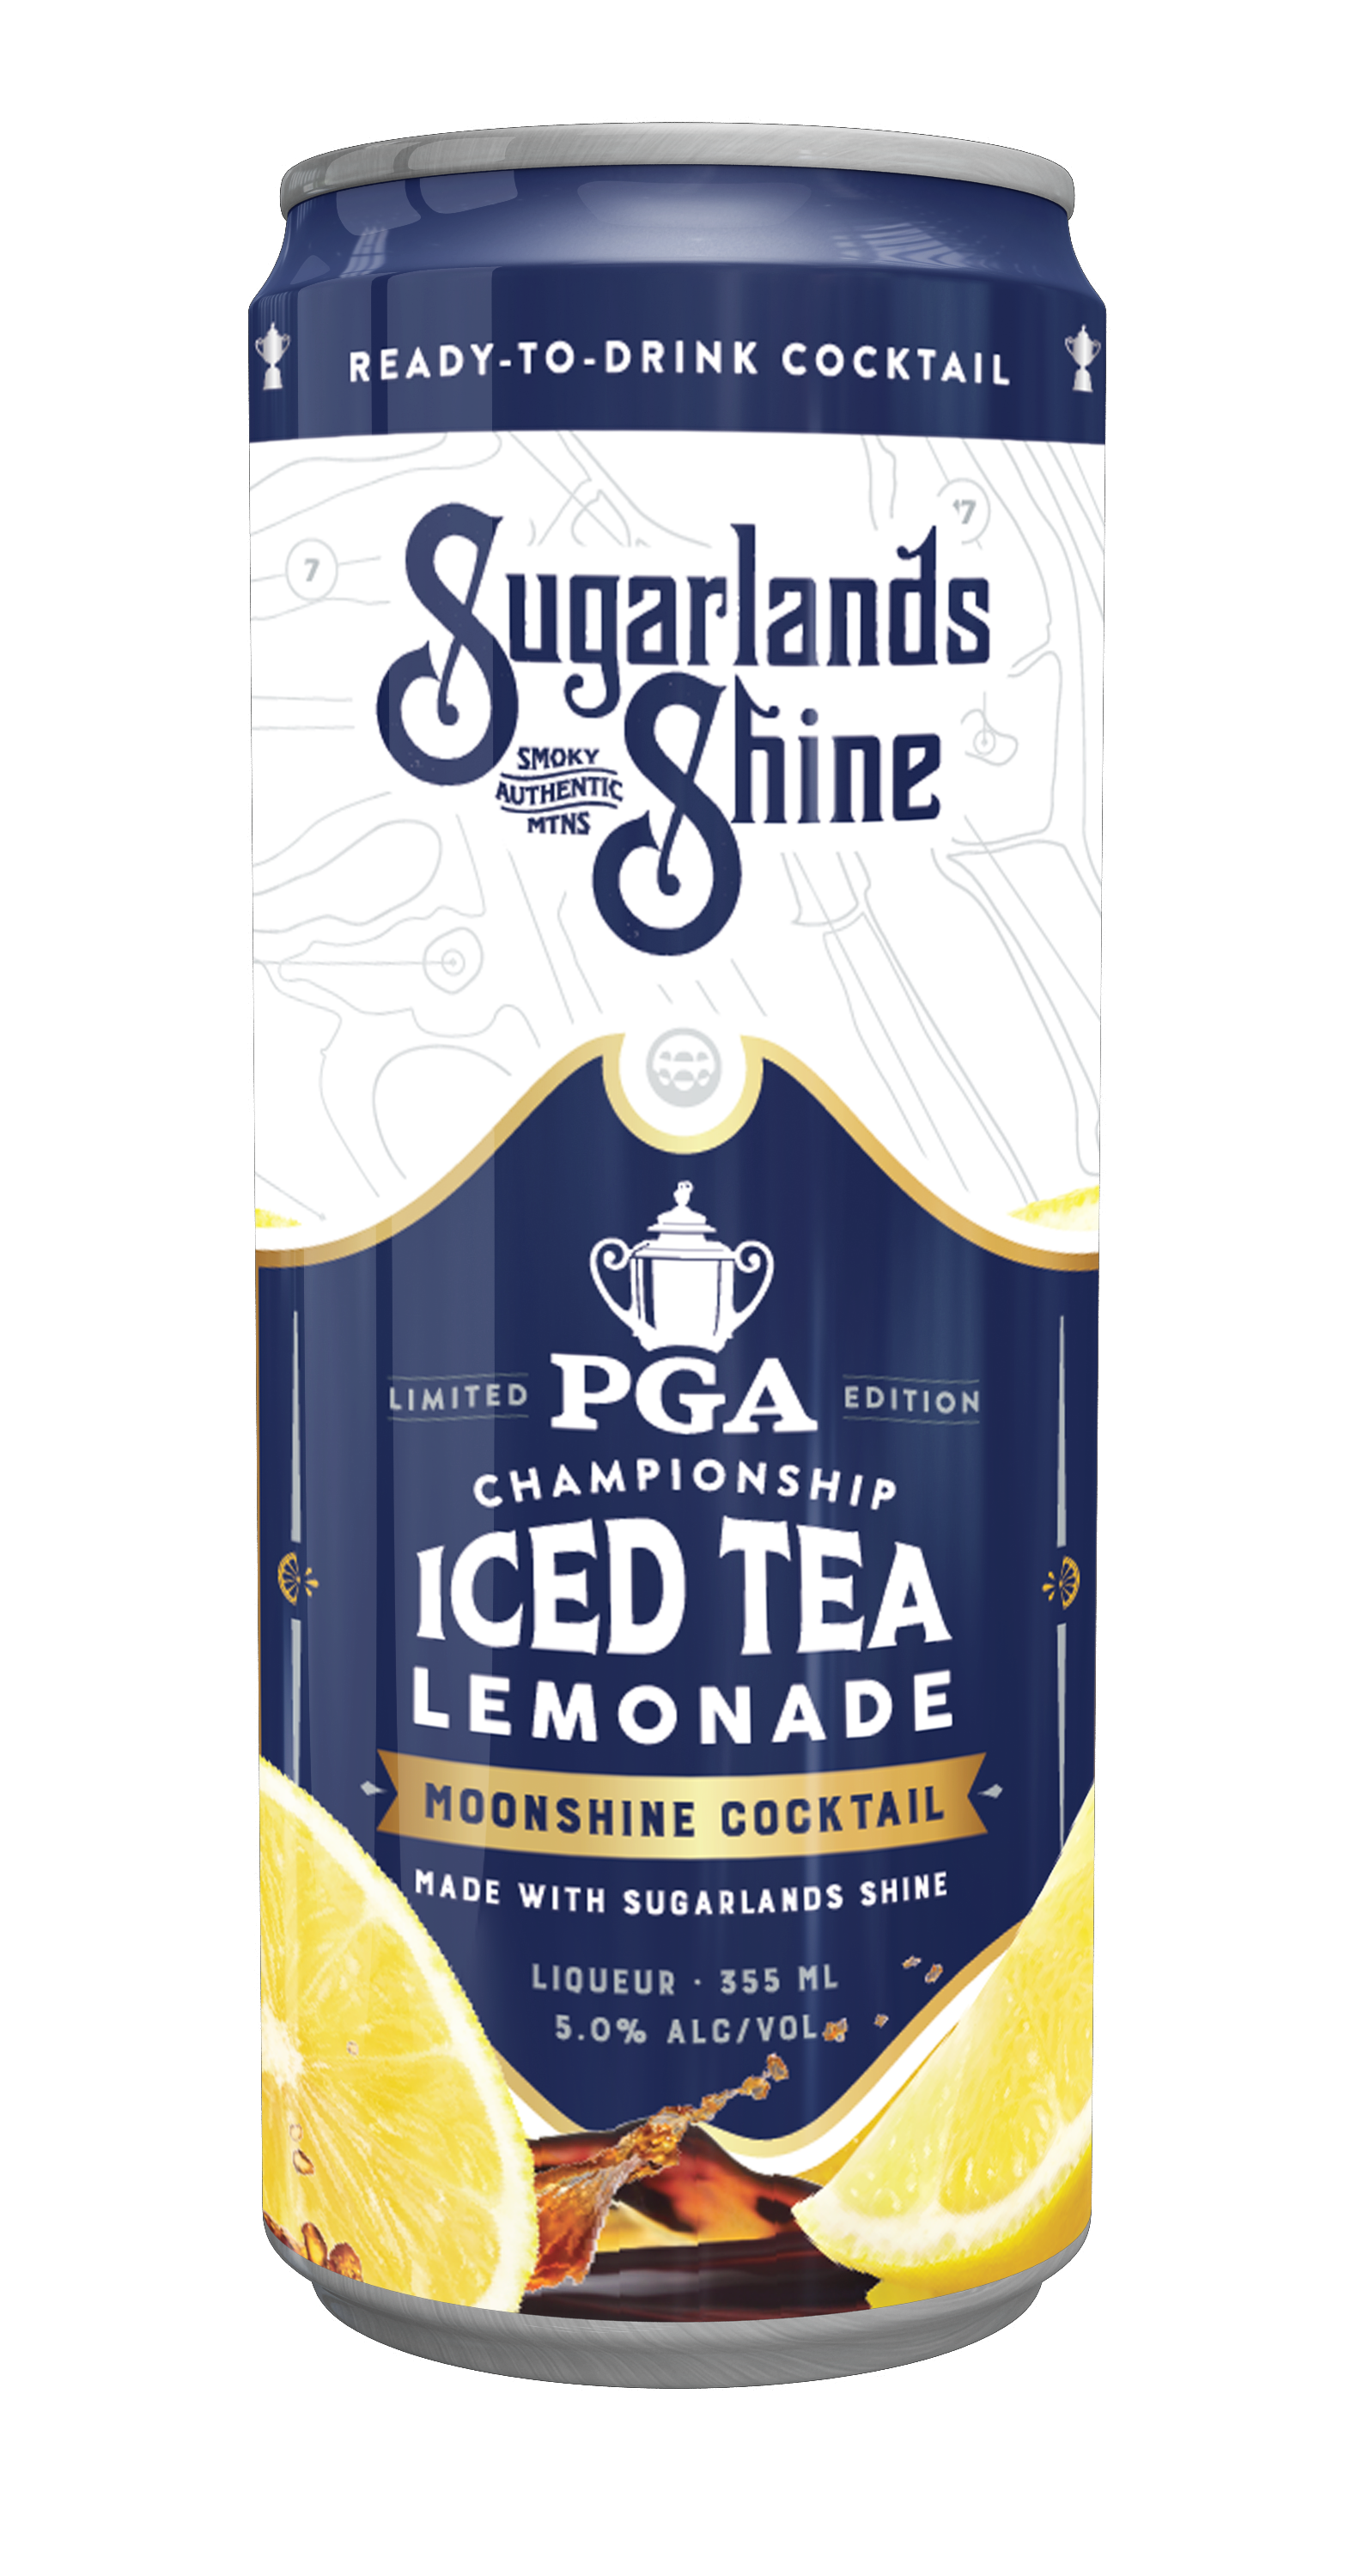 Sugarlands Distilling Company, Tuesday, May 17, 2022, Press release picture